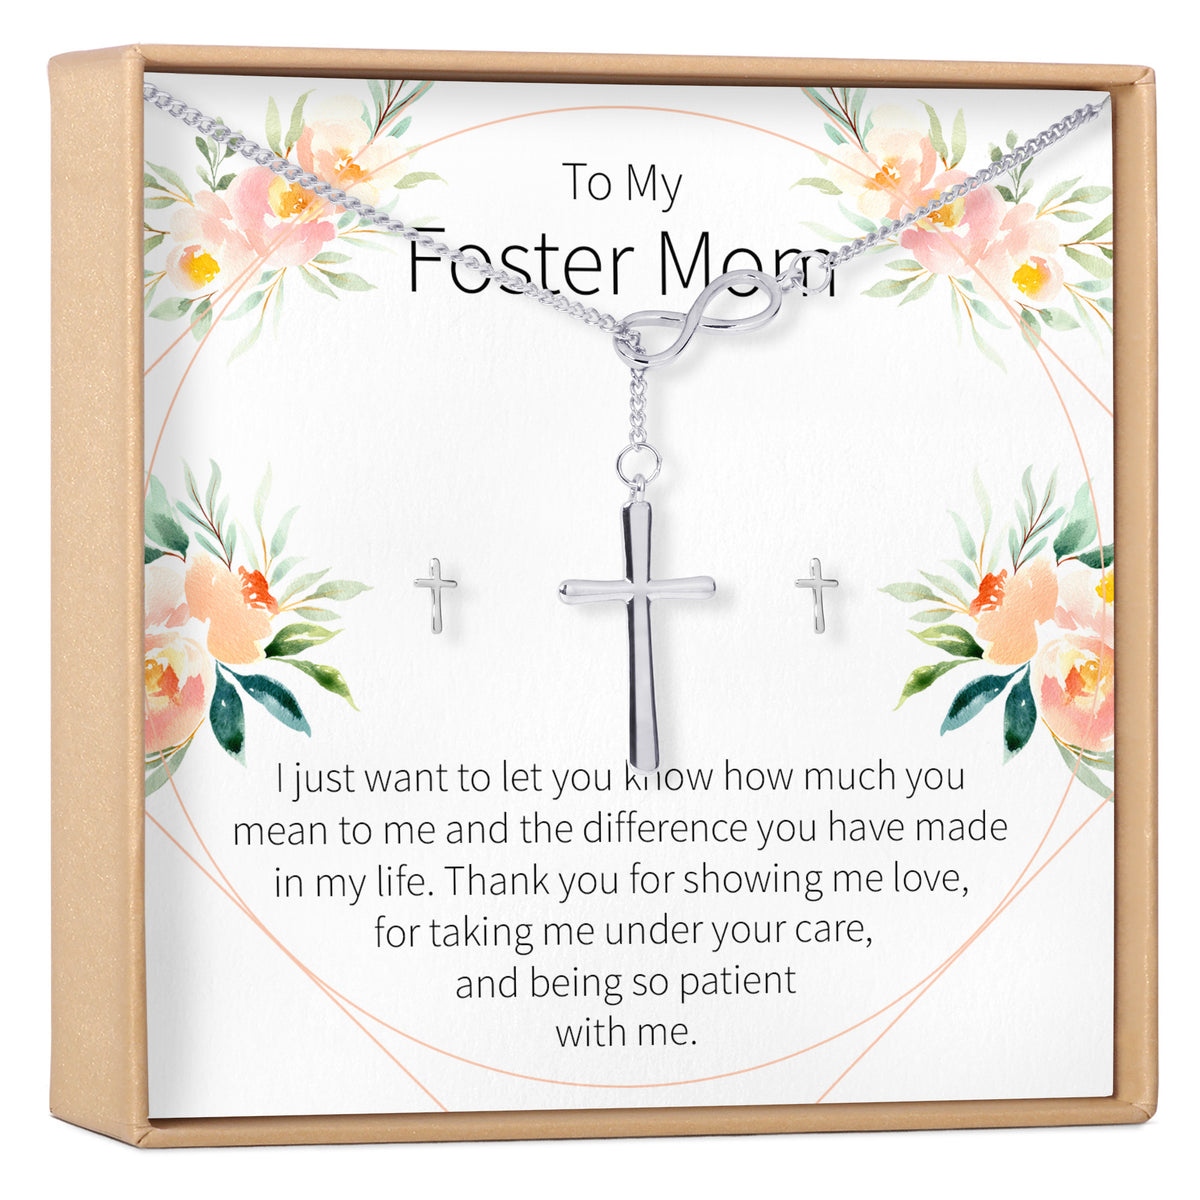 Foster Mom Cross Earring and Necklace  Jewelry Set